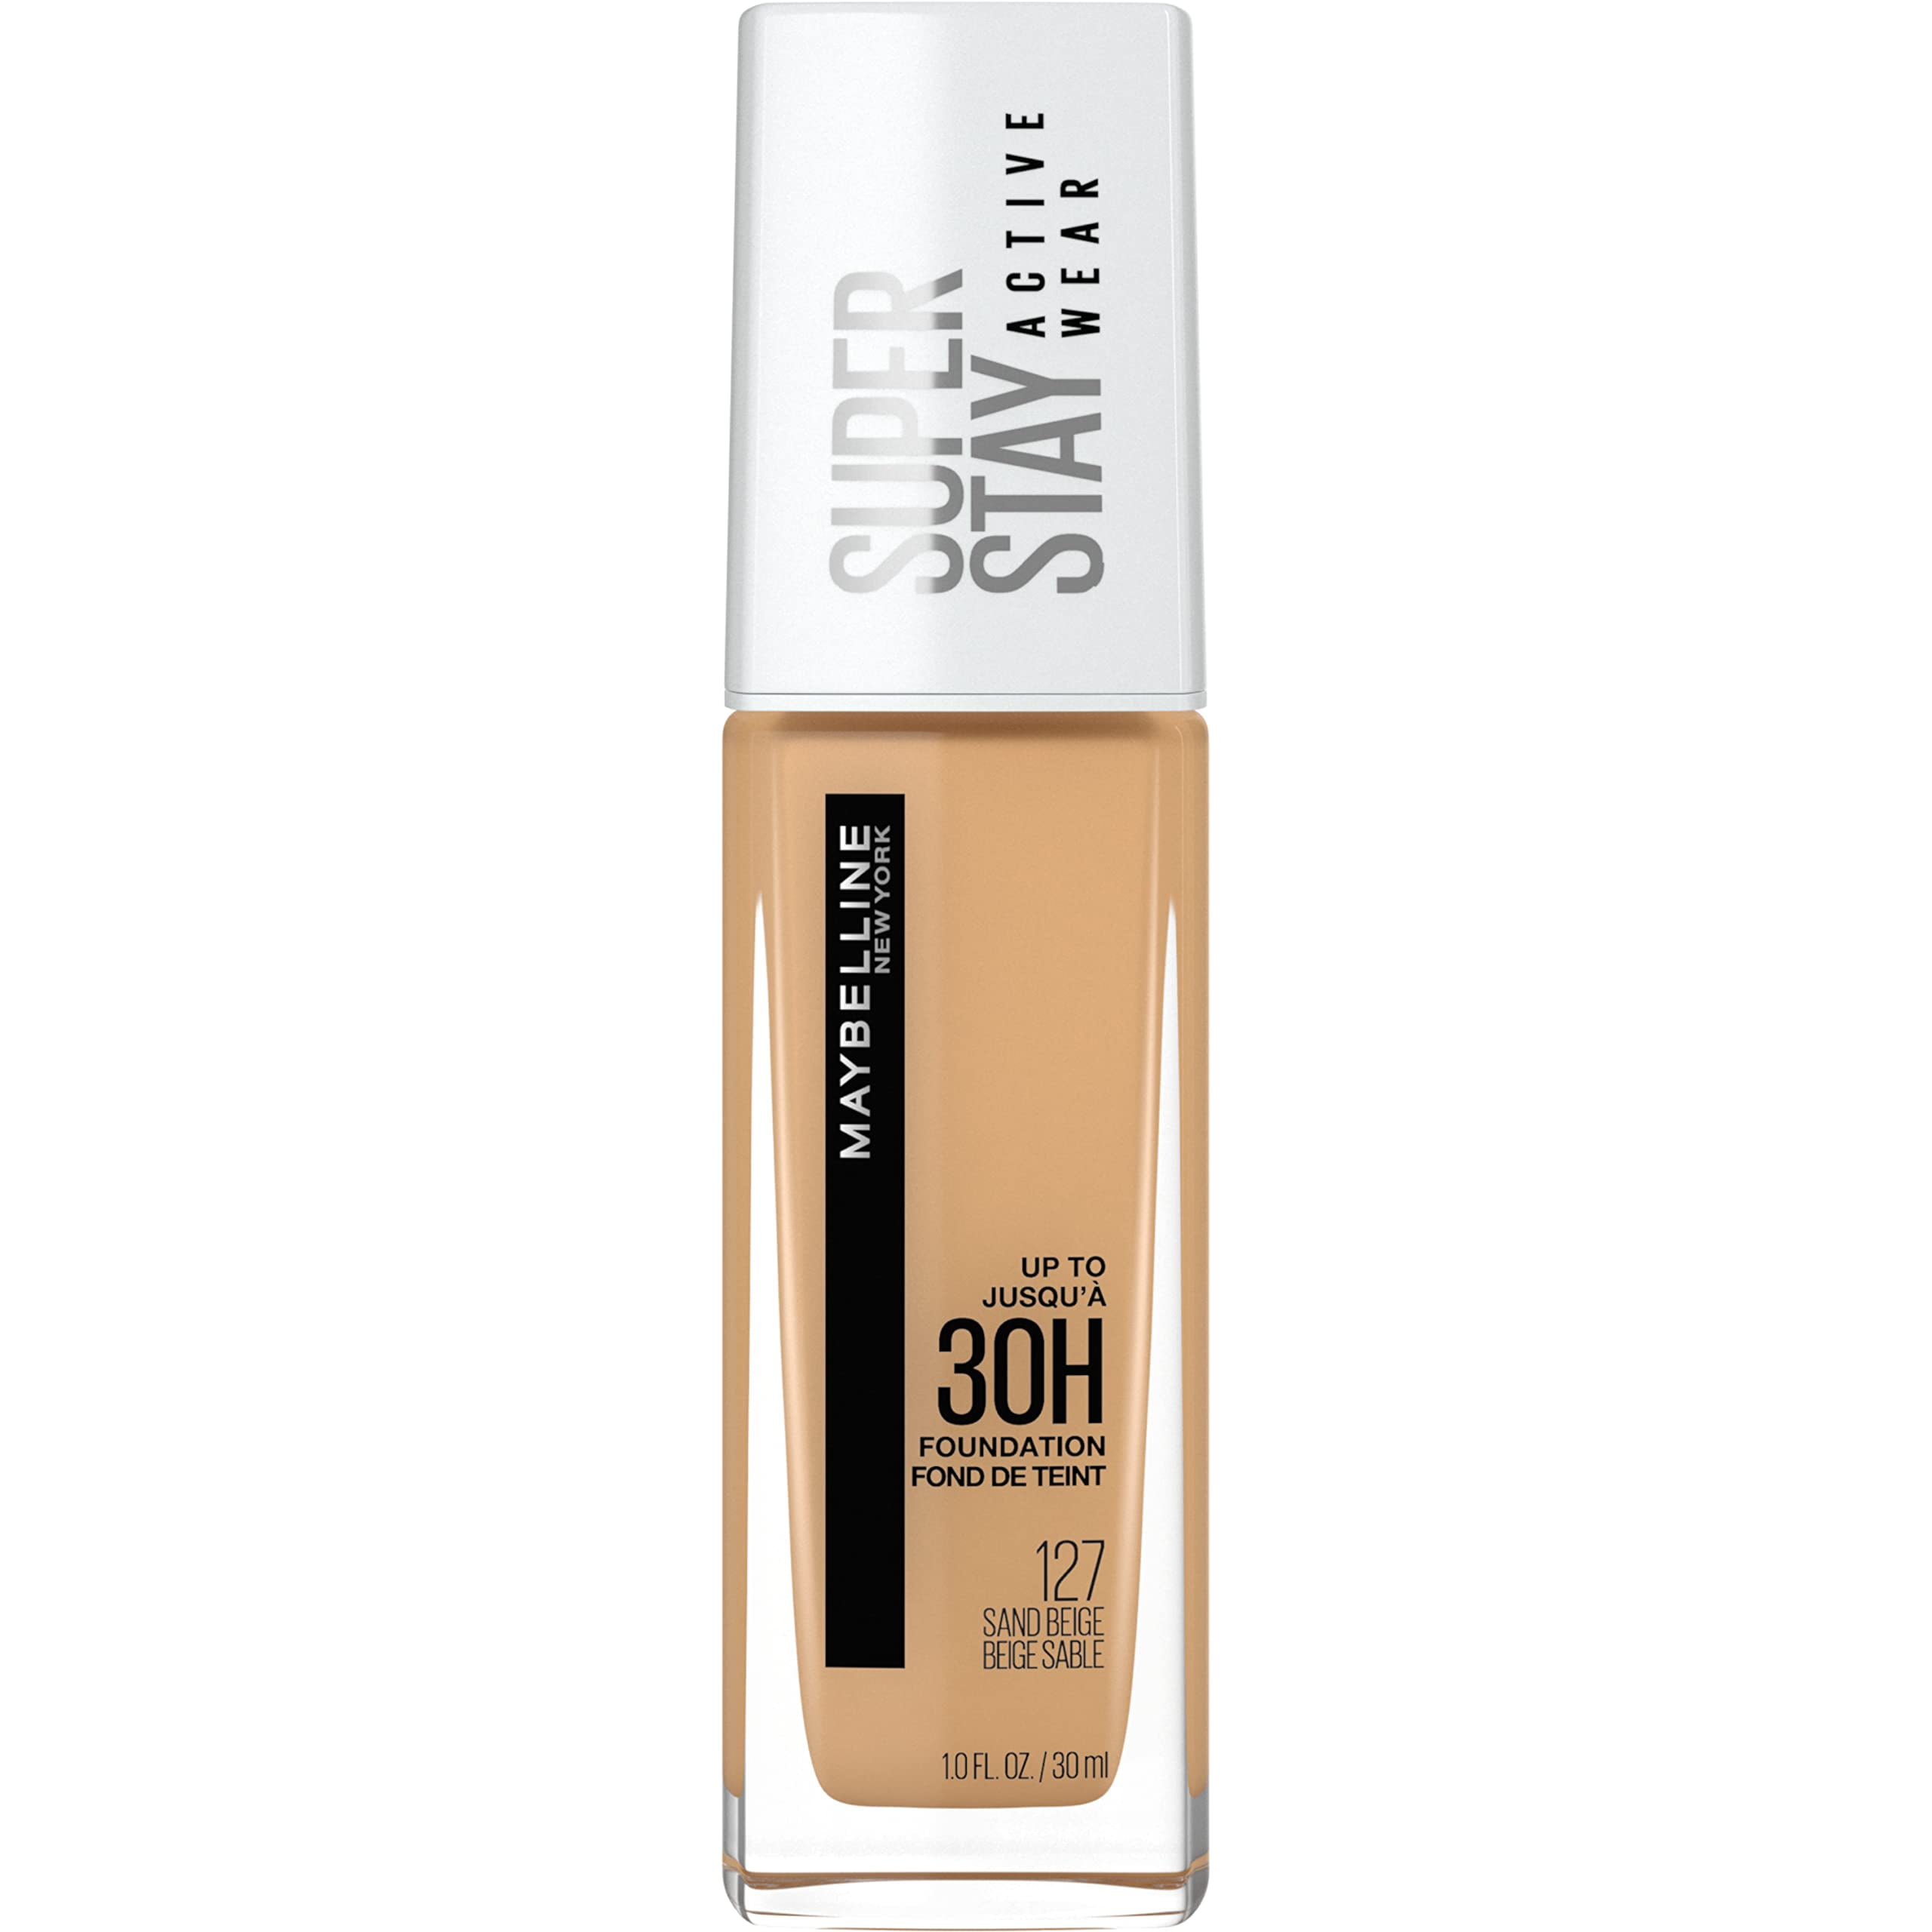 Maybelline Super Stay Full Coverage Liquid Foundation - Activewear Makeup,  Stay Gorgeous for up to 30 Hours! Waterproof, Sweatproof &  Transfer-Resistant – Matte Finish in Sand Beige – 1 Count | Foundation